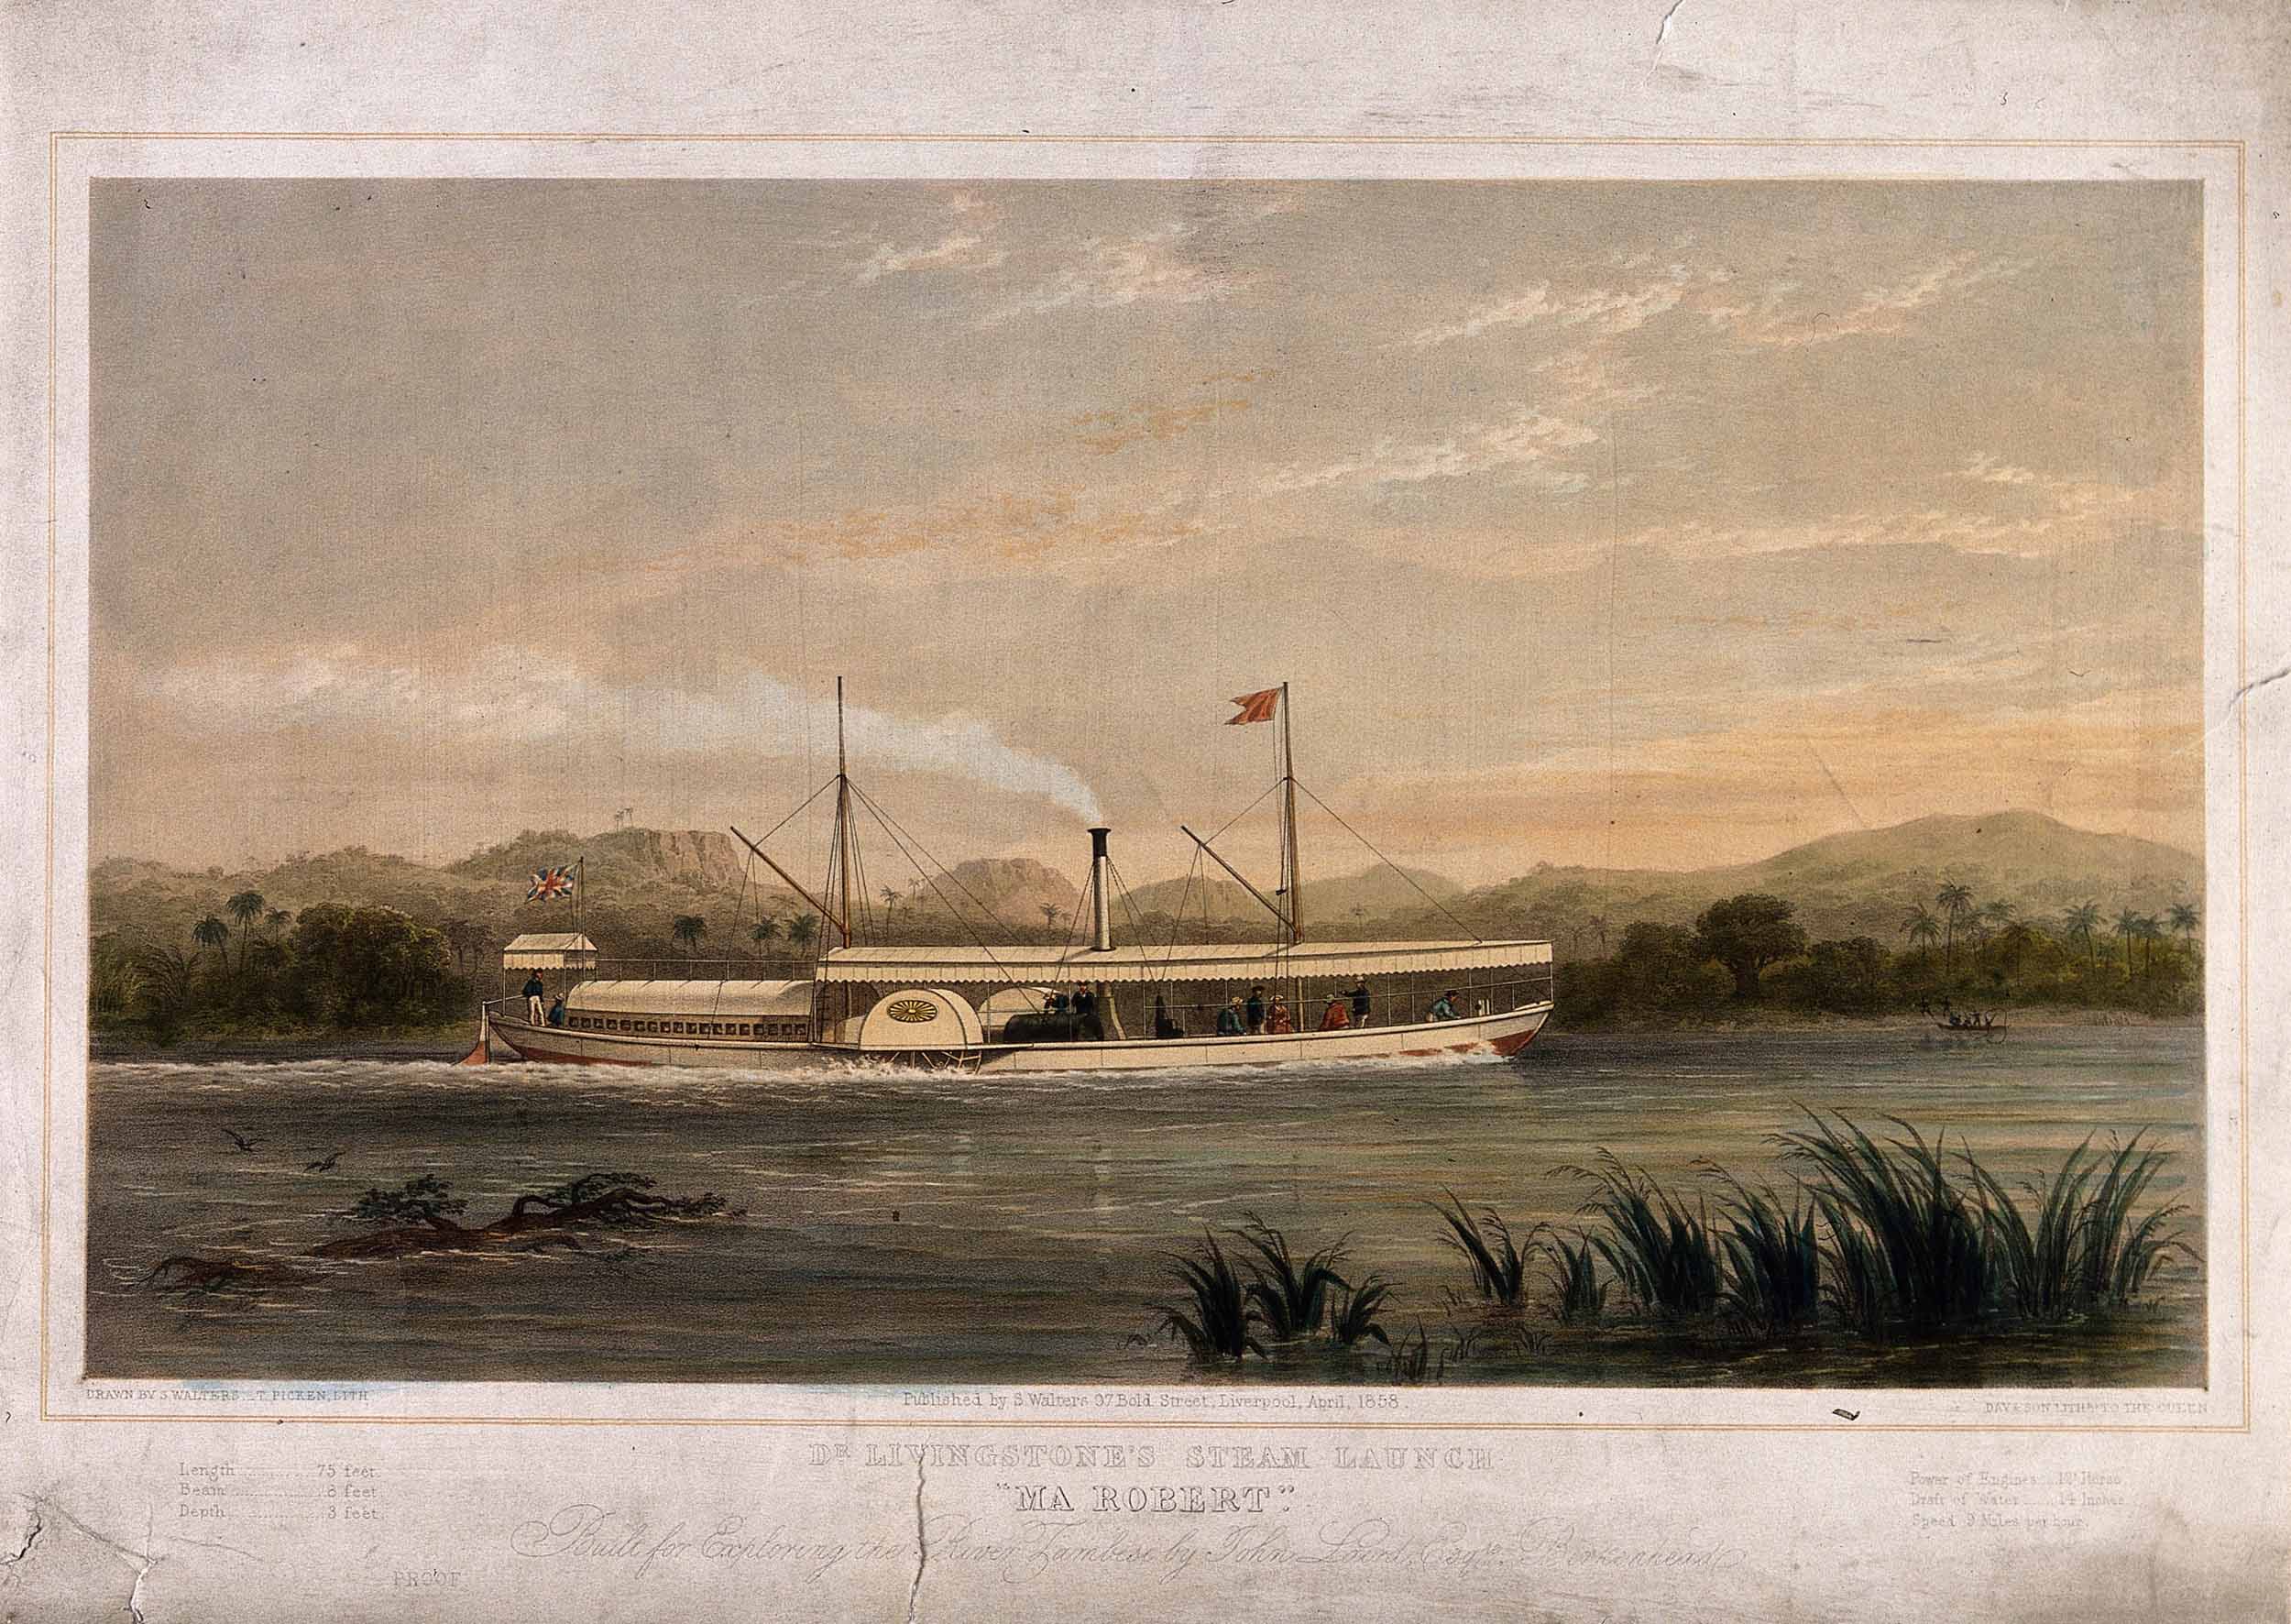 Dr. Livingstone's Steam Launch 'Ma Robert', 1858. Copyright Wellcome Library, London. Creative Commons Attribution 4.0 (https://creativecommons.org/licenses/by/4.0/). 